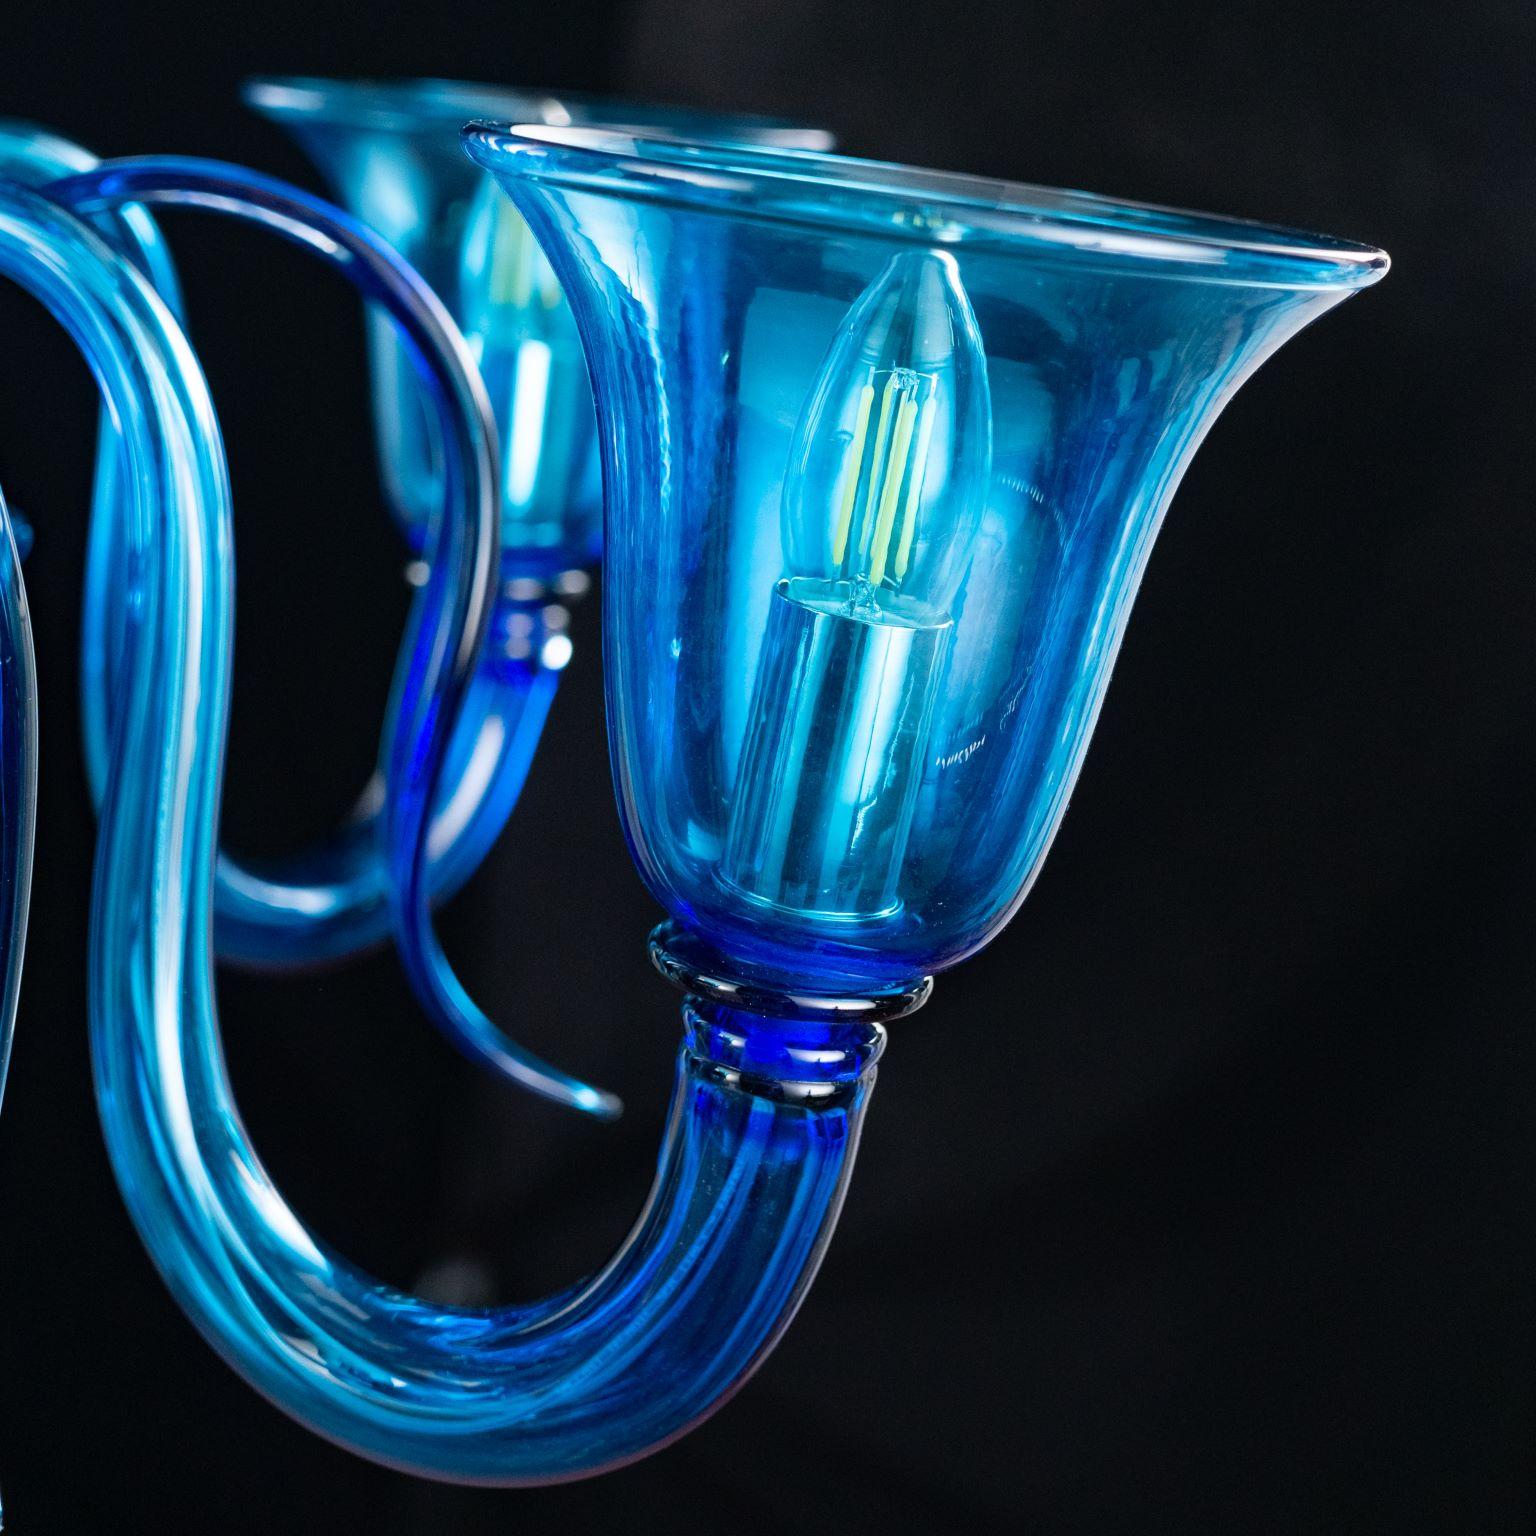 Swing 275 chandelier, 5 upwards lights, ocean blue Murano glass by Multiforme. 

The collection of Murano glass chandeliers Swing 275 is one of our collections that most differs from the Classic Murano tradition: the design of this collection is